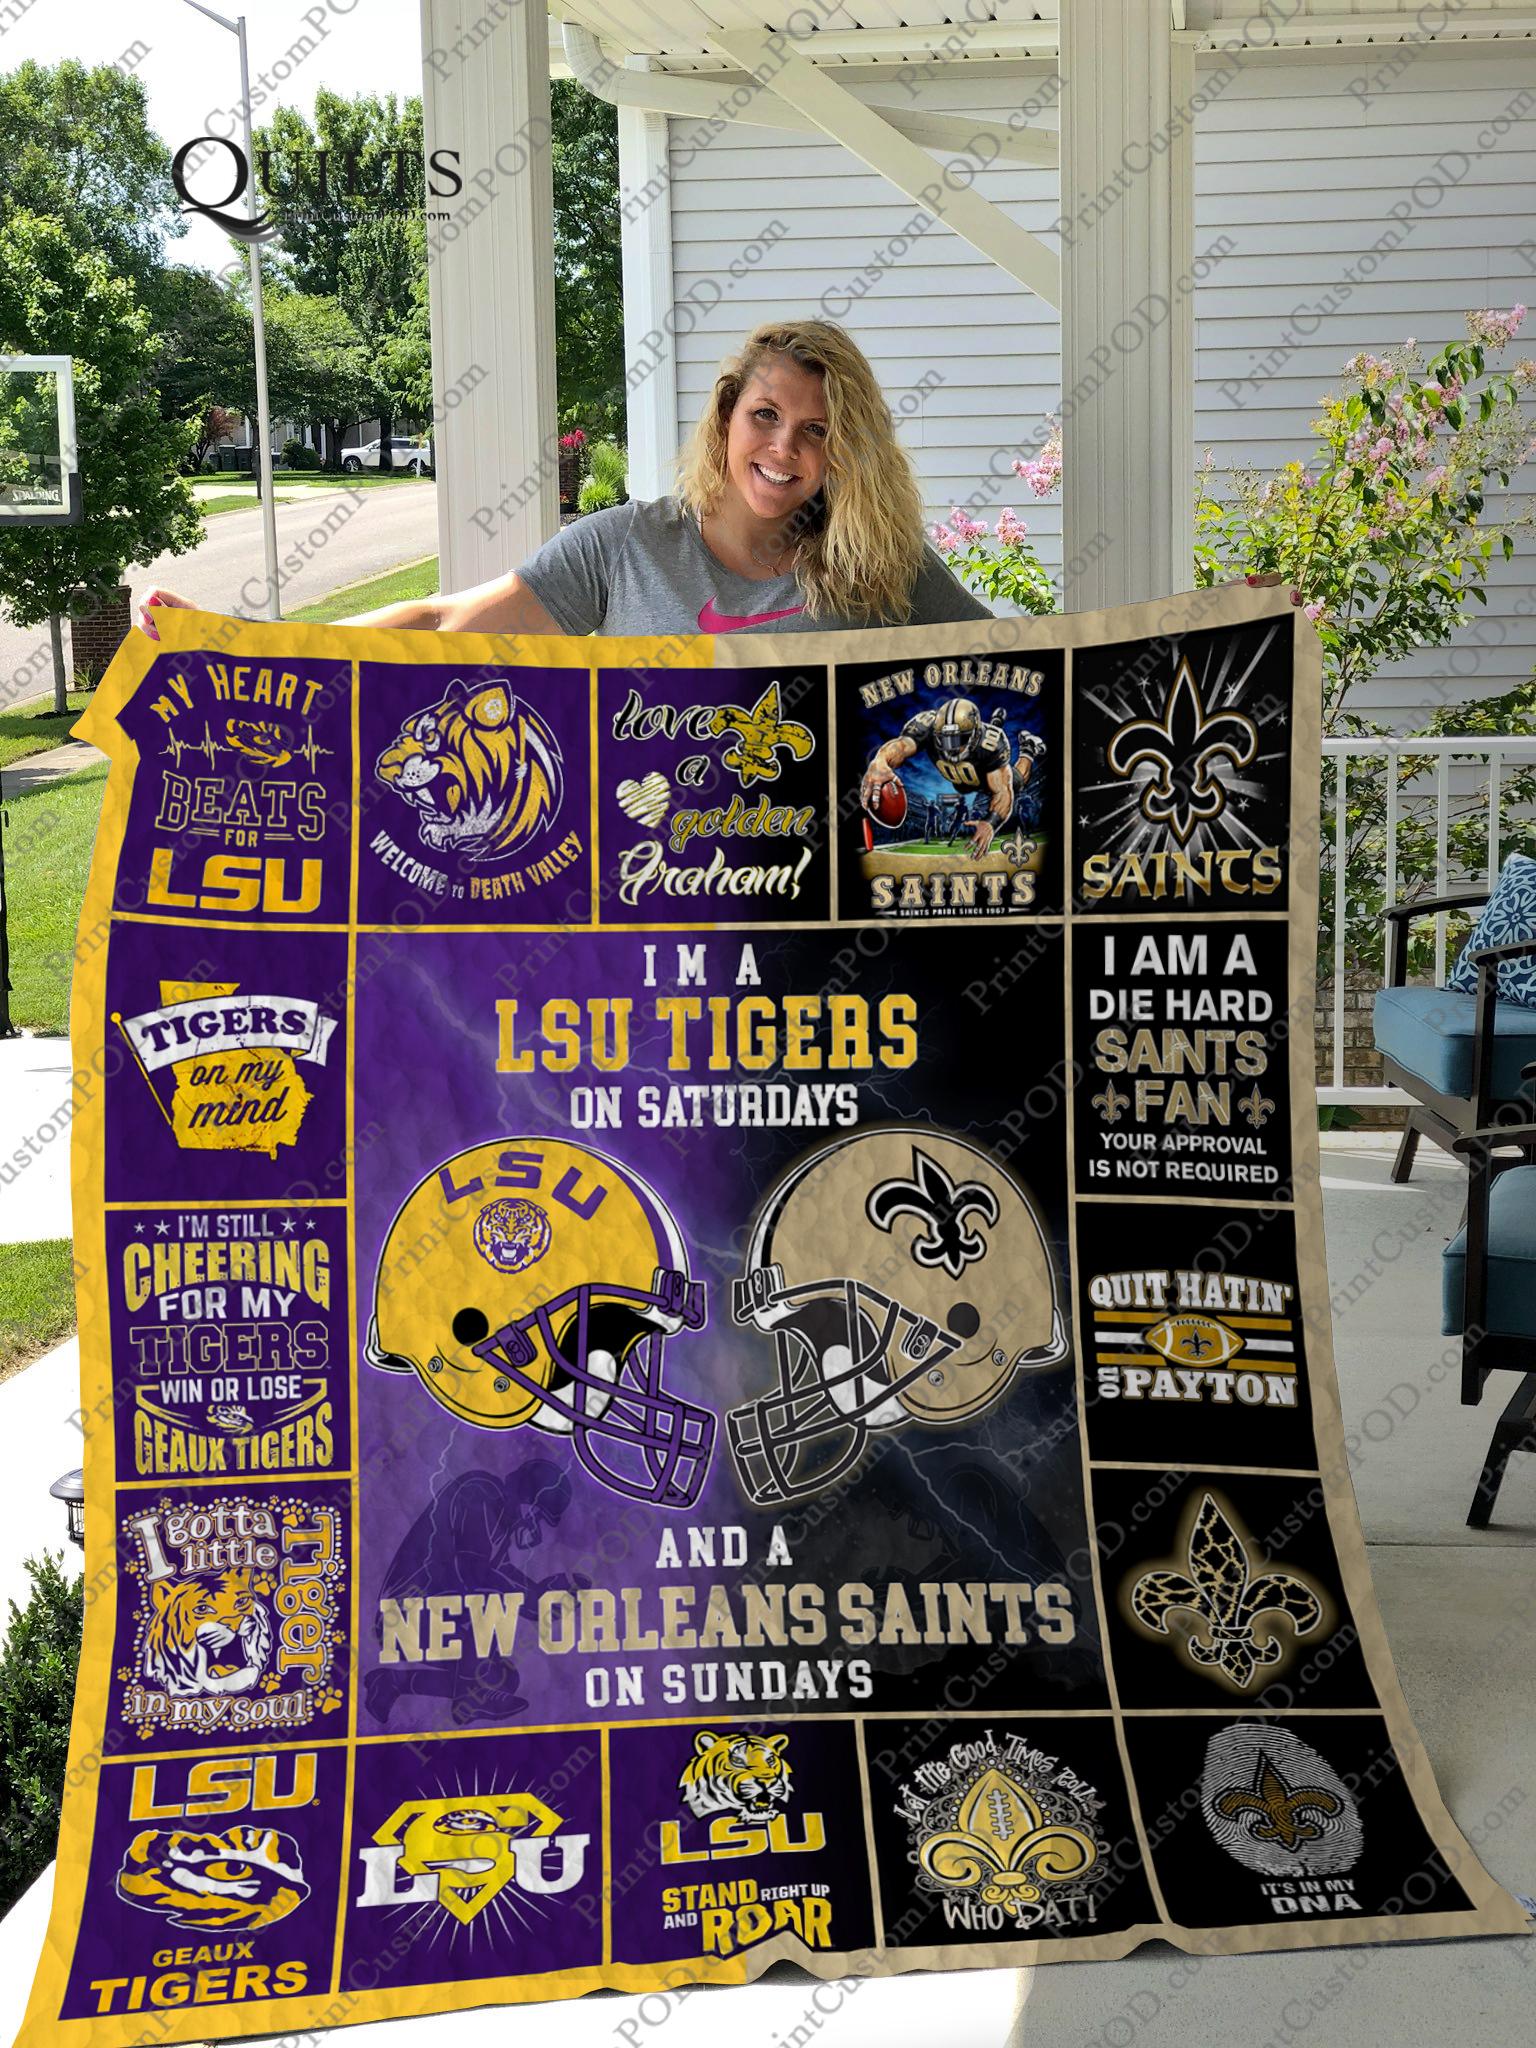 I’m a lsu tigers on saturdays and a new orleans saints on sundays blanket